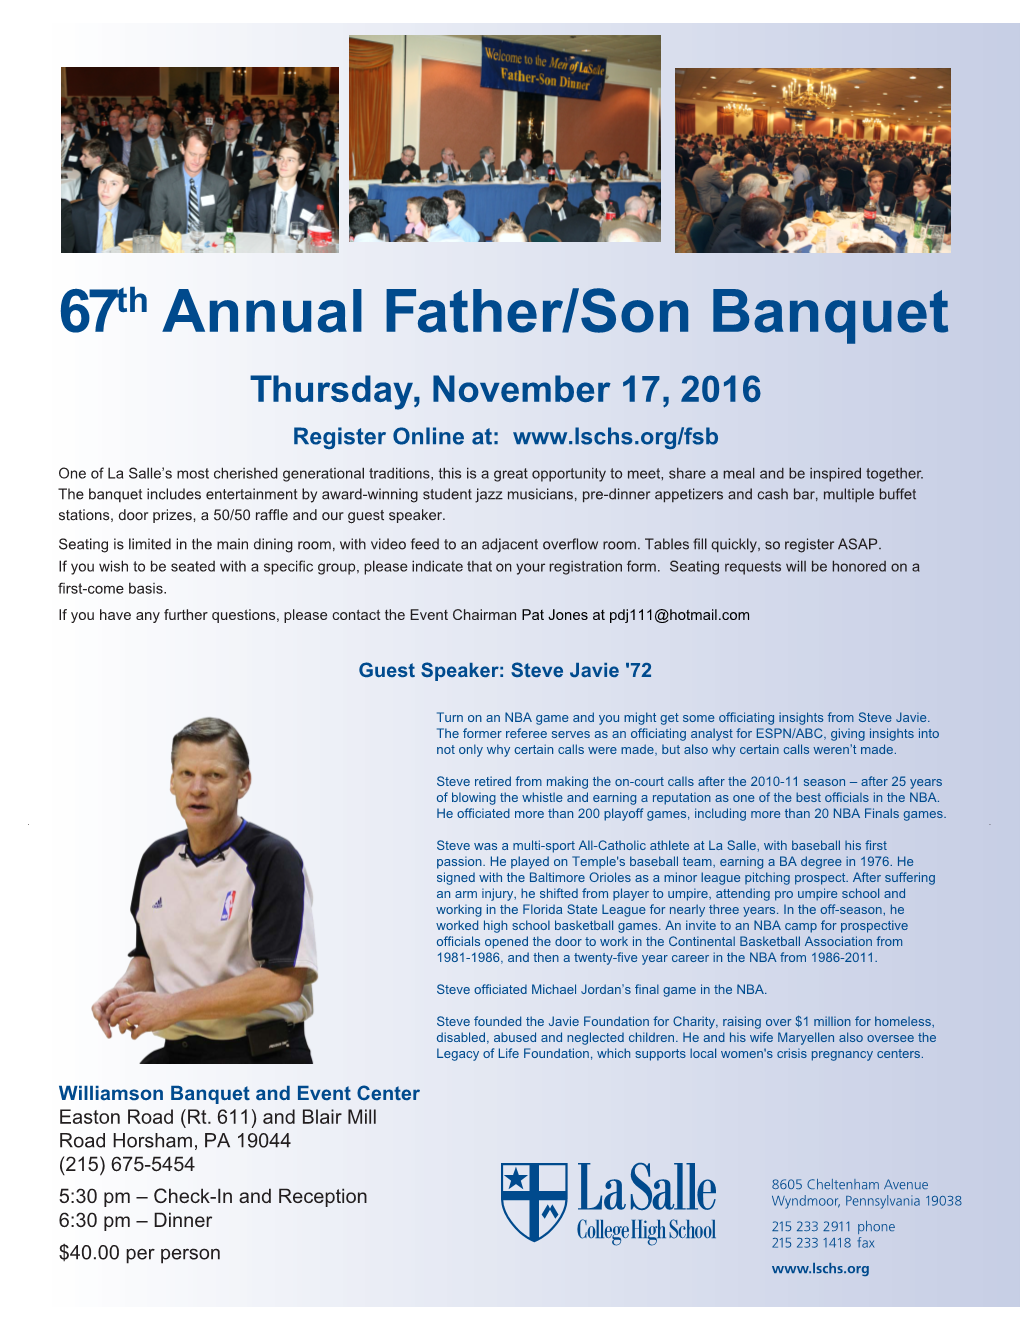 67Th Annual Father/Son Banquet Thursday, November 17, 2016 Register Online At